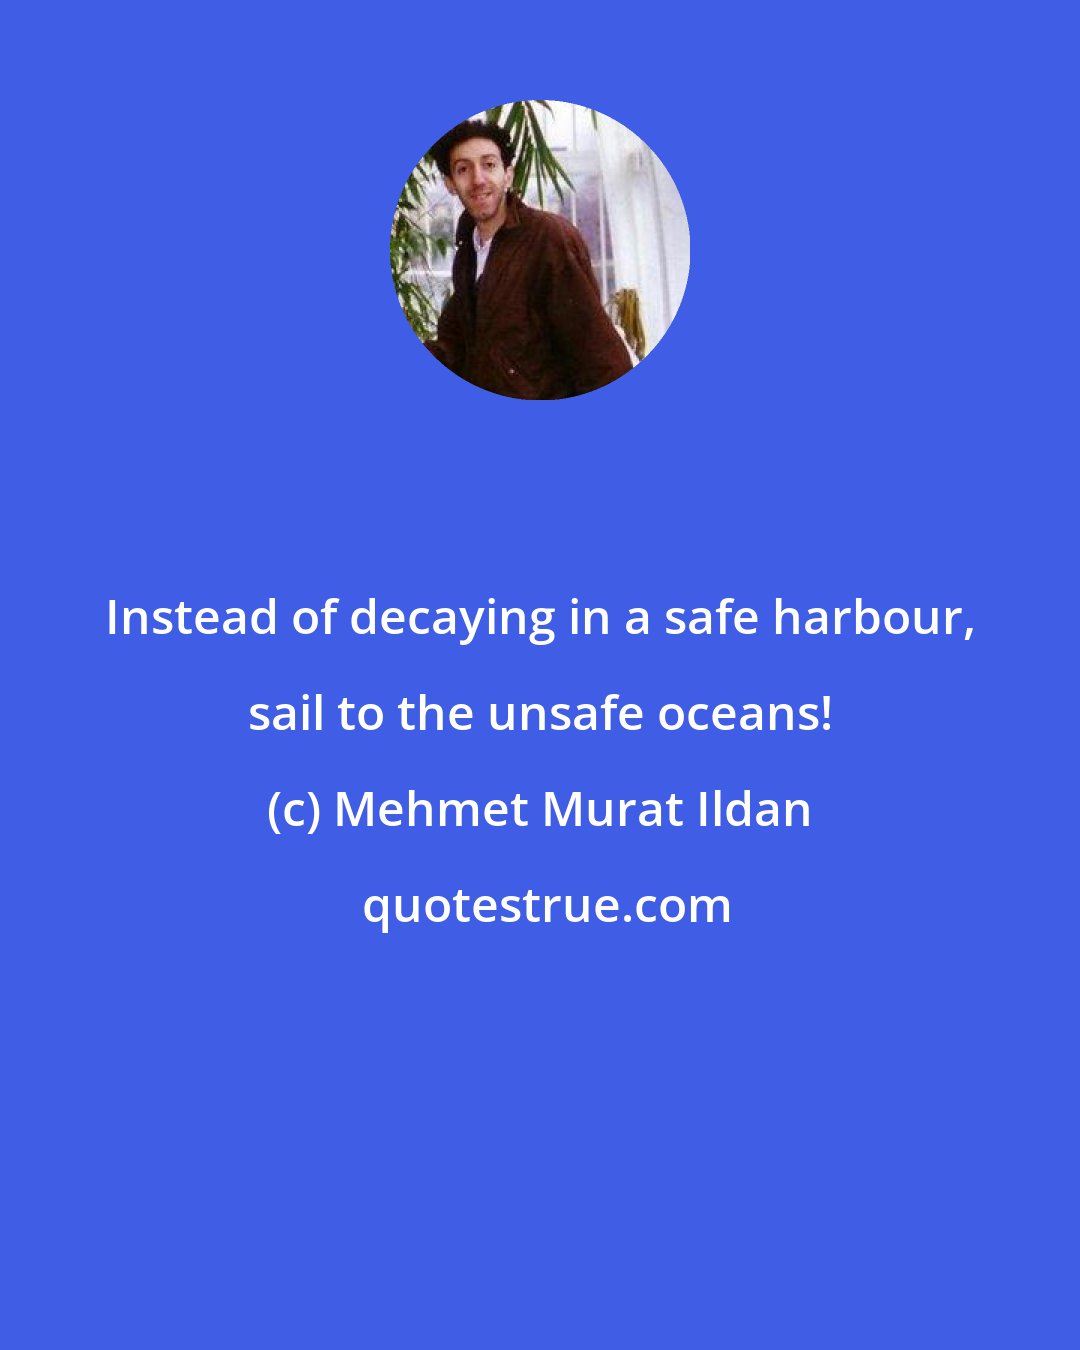 Mehmet Murat Ildan: Instead of decaying in a safe harbour, sail to the unsafe oceans!